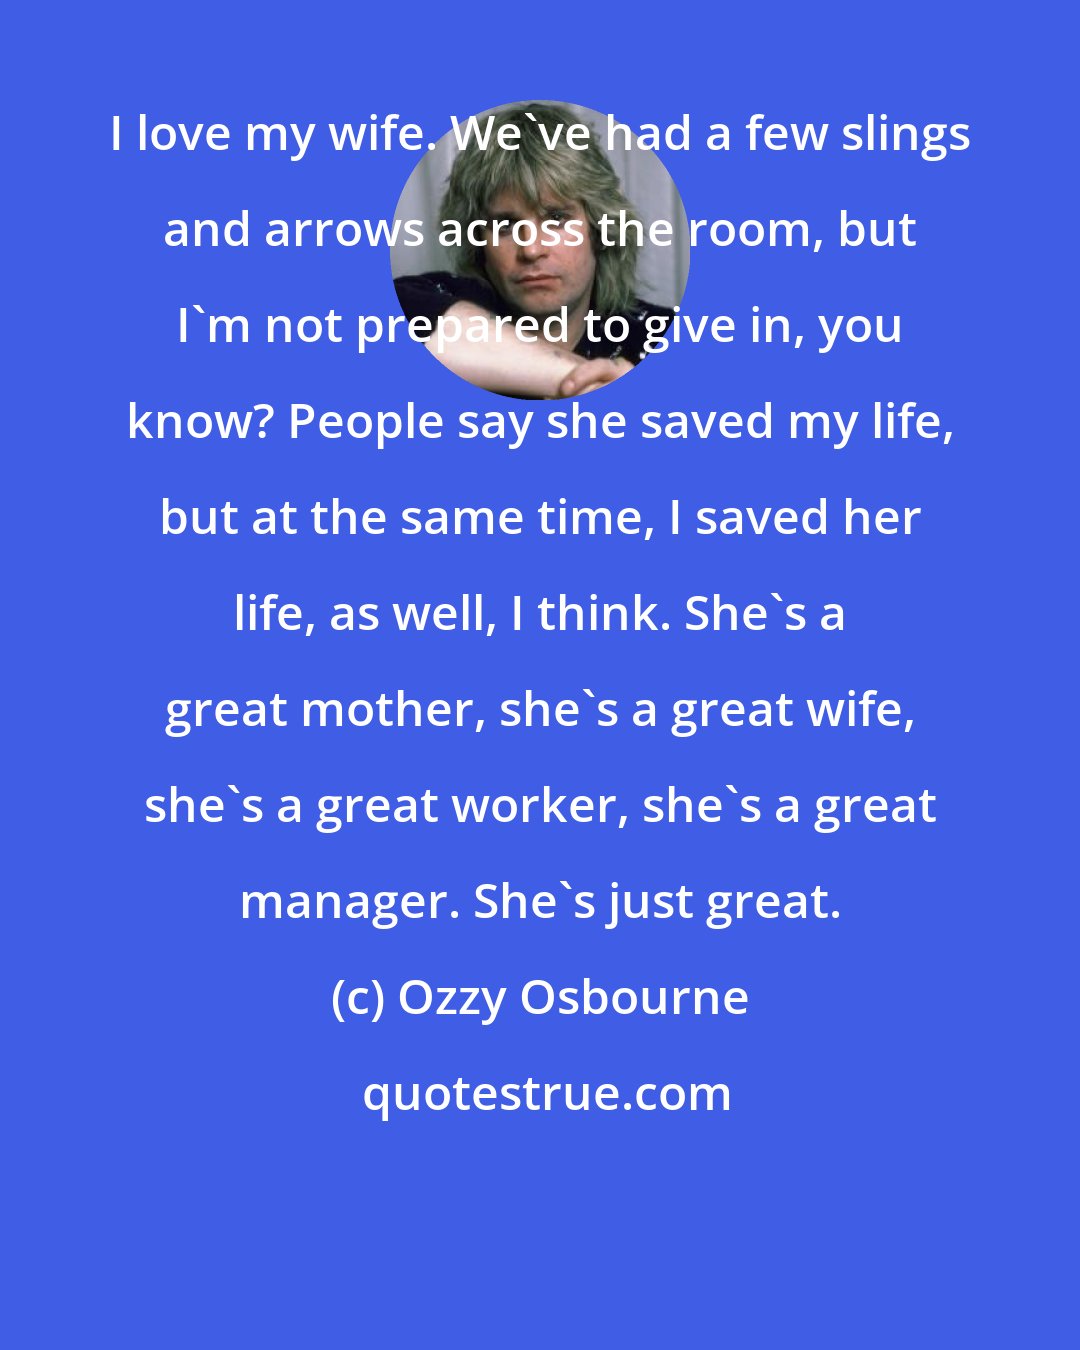 Ozzy Osbourne: I love my wife. We've had a few slings and arrows across the room, but I'm not prepared to give in, you know? People say she saved my life, but at the same time, I saved her life, as well, I think. She's a great mother, she's a great wife, she's a great worker, she's a great manager. She's just great.